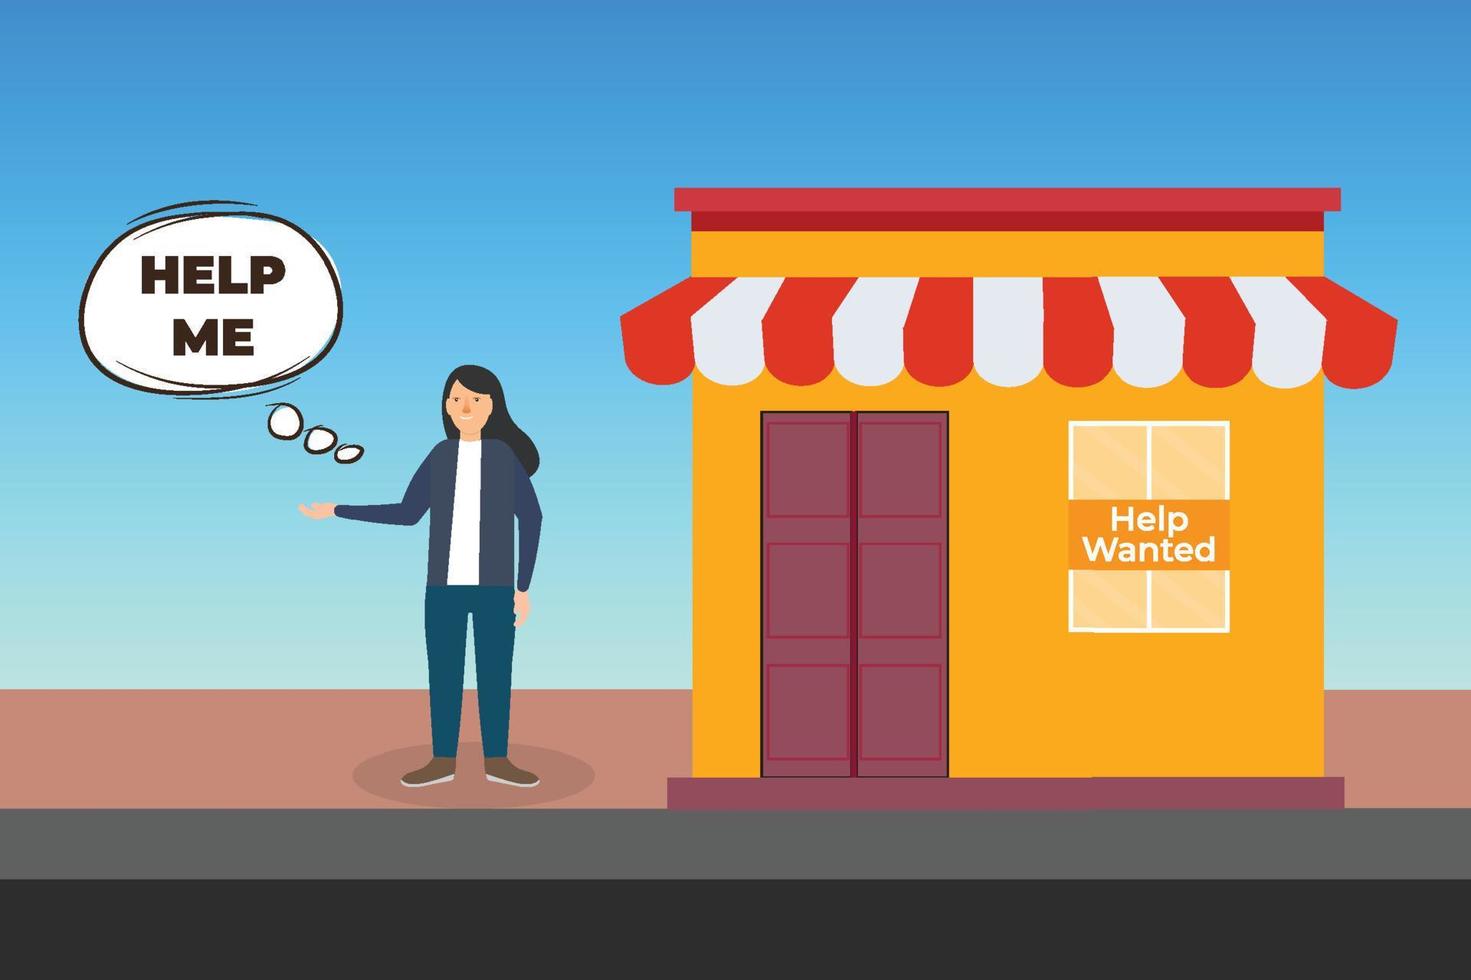 Business Woman is asking for help in front of a store vector. Flat female character illustration with a help-me text bubble. Business hiring concept with flat character design. vector